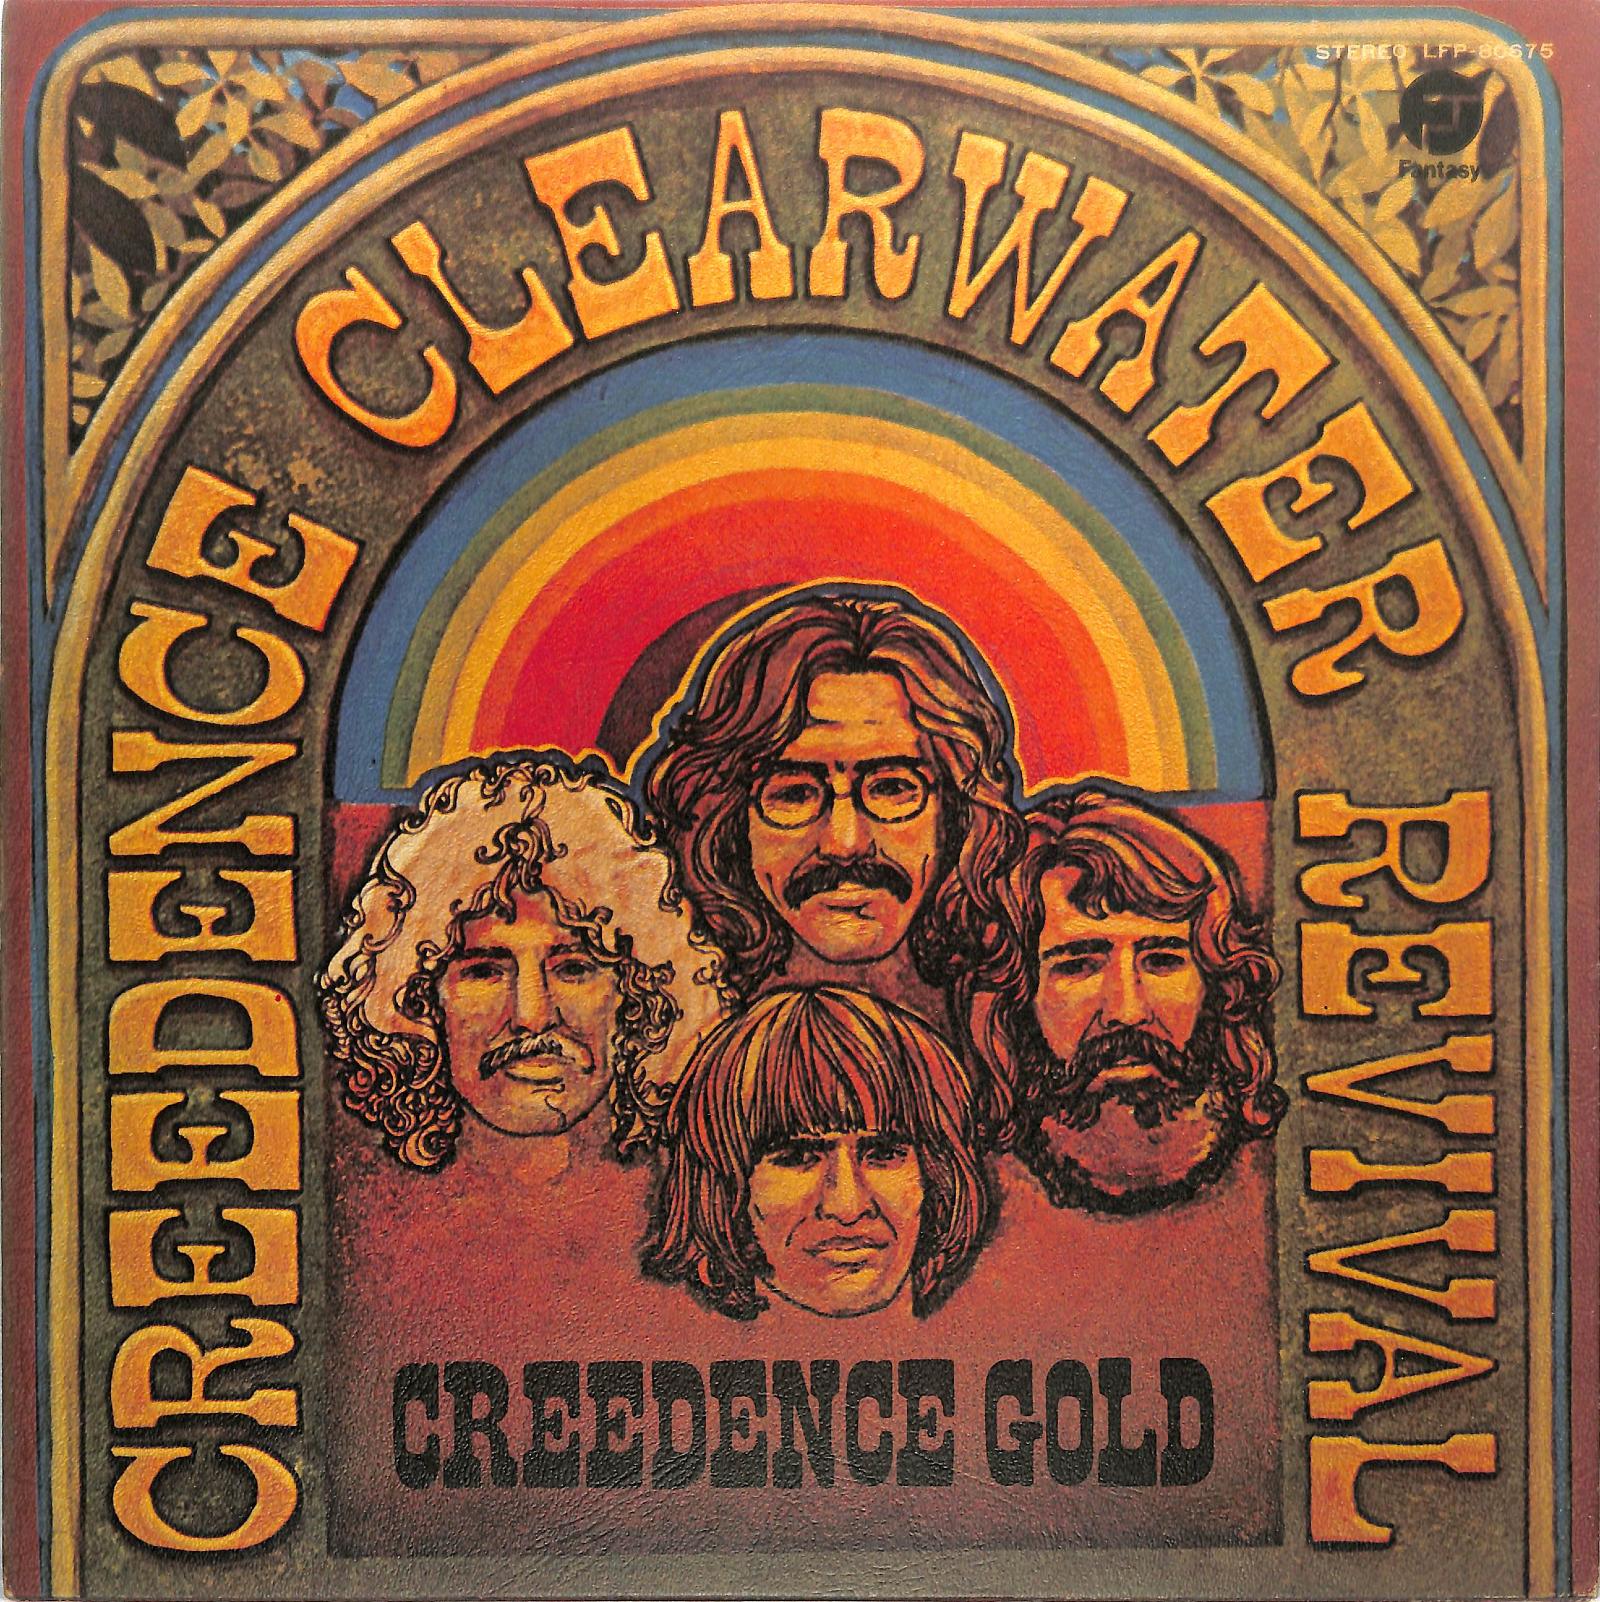 CREEDENCE CLEARWATER REVIVAL - Creedence Gold